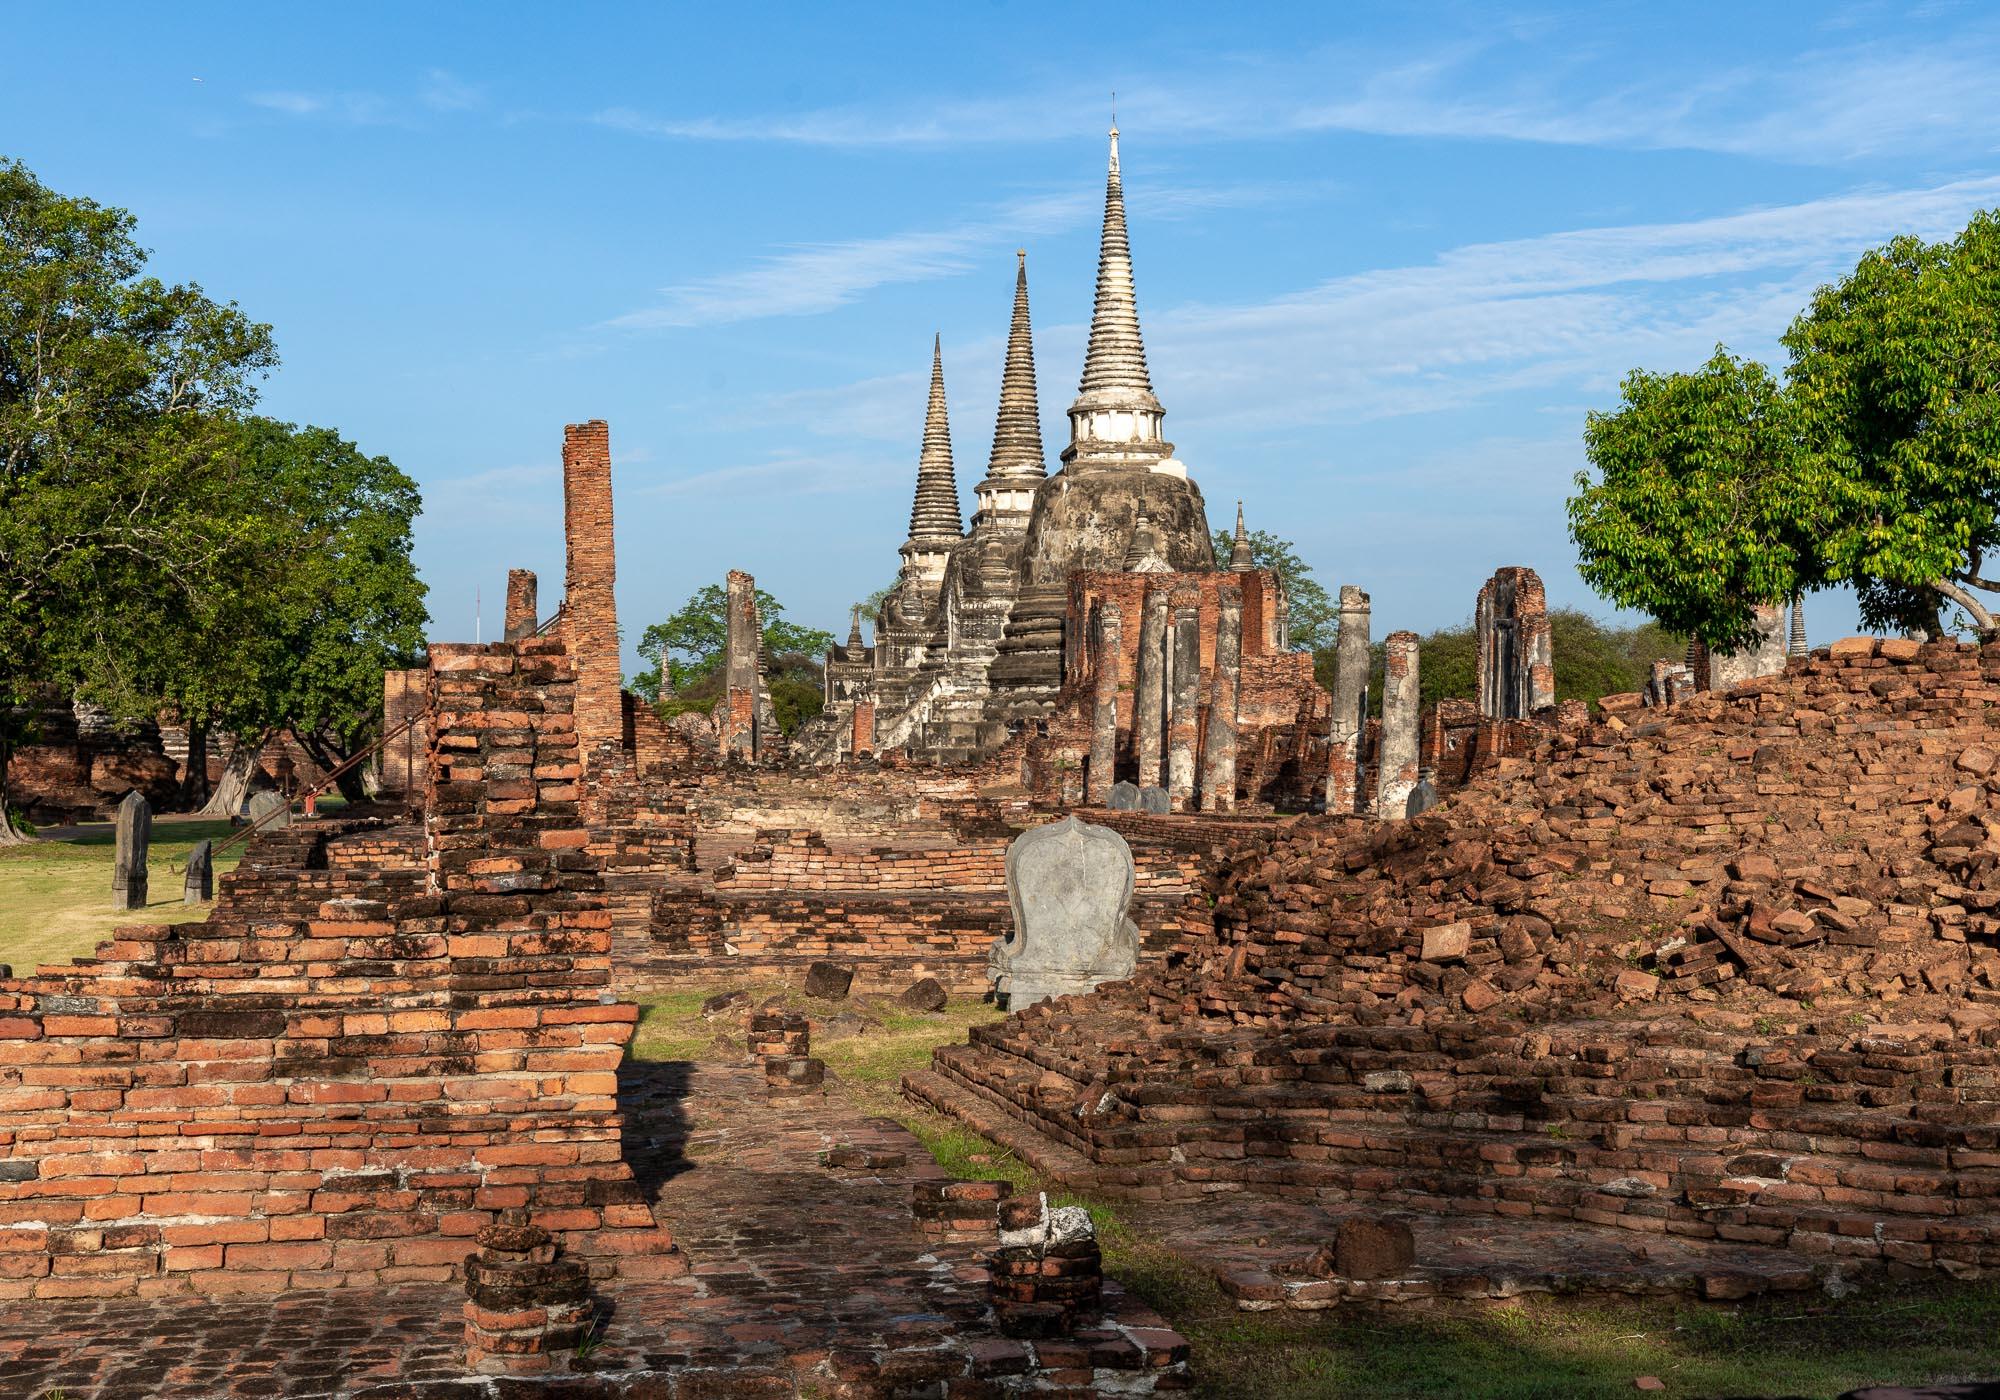 Although the stupas are in a good condition, other buildings that would've been around them are largely unrestored. – © Michael Turtle